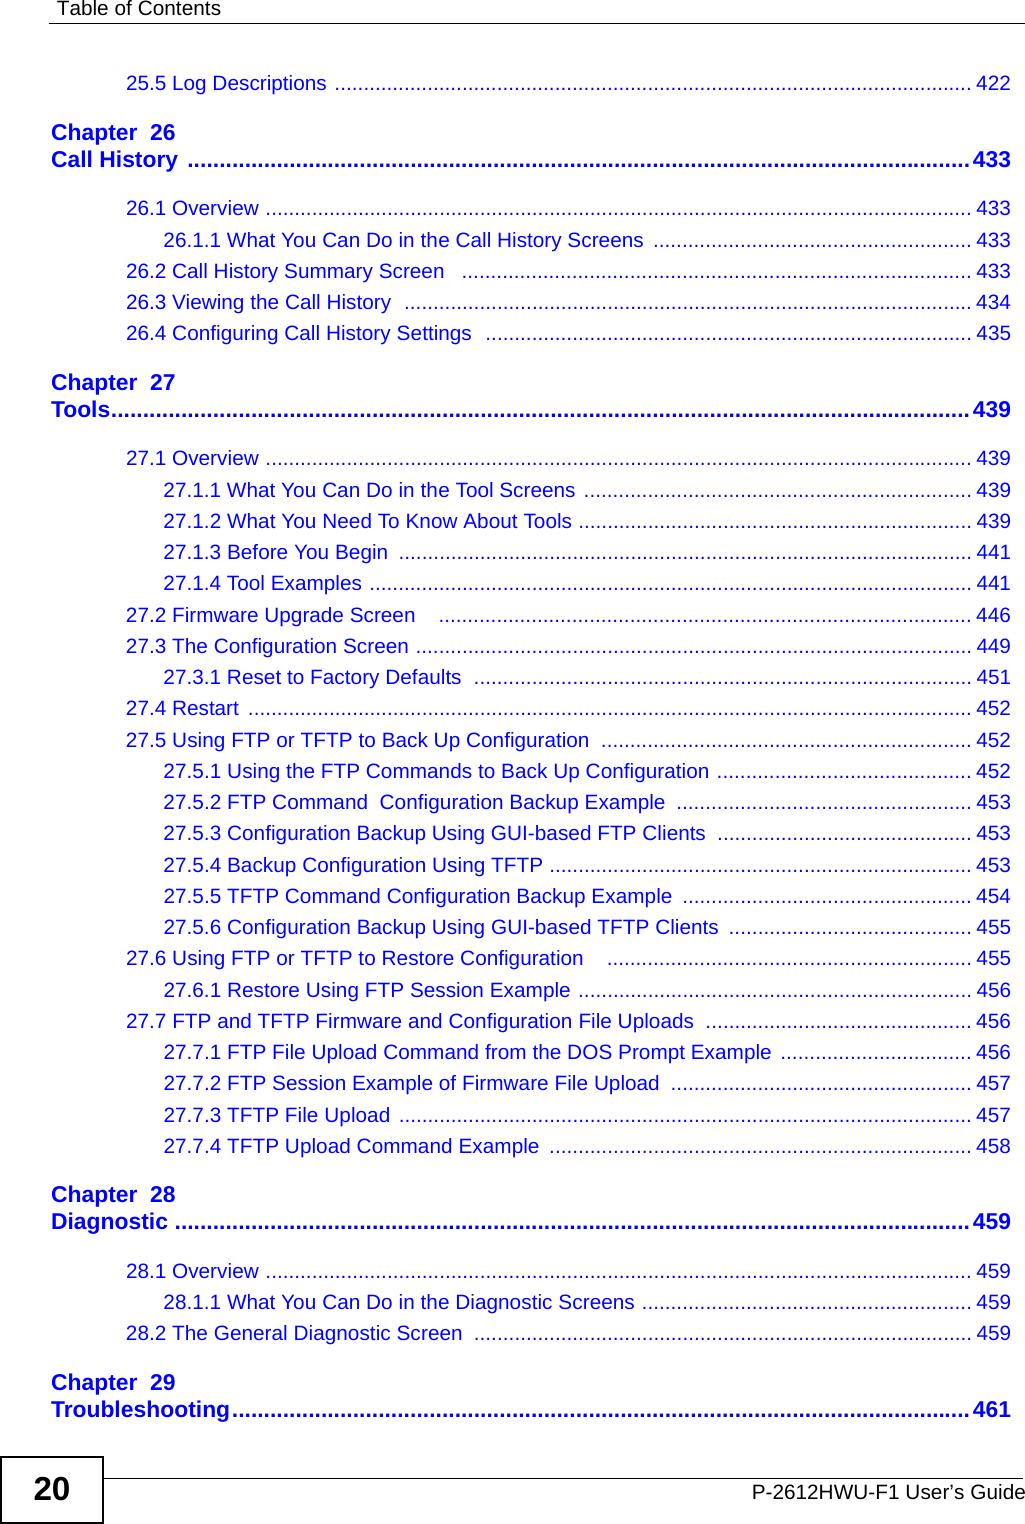 Table of ContentsP-2612HWU-F1 User’s Guide2025.5 Log Descriptions .............................................................................................................. 422Chapter  26Call History ...........................................................................................................................43326.1 Overview .......................................................................................................................... 43326.1.1 What You Can Do in the Call History Screens  ....................................................... 43326.2 Call History Summary Screen   ........................................................................................ 43326.3 Viewing the Call History  .................................................................................................. 43426.4 Configuring Call History Settings  .................................................................................... 435Chapter  27Tools.......................................................................................................................................43927.1 Overview .......................................................................................................................... 43927.1.1 What You Can Do in the Tool Screens ................................................................... 43927.1.2 What You Need To Know About Tools .................................................................... 43927.1.3 Before You Begin  ................................................................................................... 44127.1.4 Tool Examples ........................................................................................................ 44127.2 Firmware Upgrade Screen    ............................................................................................ 44627.3 The Configuration Screen ................................................................................................ 44927.3.1 Reset to Factory Defaults  ...................................................................................... 45127.4 Restart  ............................................................................................................................. 45227.5 Using FTP or TFTP to Back Up Configuration  ................................................................ 45227.5.1 Using the FTP Commands to Back Up Configuration ............................................ 45227.5.2 FTP Command  Configuration Backup Example ................................................... 45327.5.3 Configuration Backup Using GUI-based FTP Clients  ............................................ 45327.5.4 Backup Configuration Using TFTP ......................................................................... 45327.5.5 TFTP Command Configuration Backup Example  .................................................. 45427.5.6 Configuration Backup Using GUI-based TFTP Clients .......................................... 45527.6 Using FTP or TFTP to Restore Configuration    ............................................................... 45527.6.1 Restore Using FTP Session Example .................................................................... 45627.7 FTP and TFTP Firmware and Configuration File Uploads  .............................................. 45627.7.1 FTP File Upload Command from the DOS Prompt Example  ................................. 45627.7.2 FTP Session Example of Firmware File Upload .................................................... 45727.7.3 TFTP File Upload ................................................................................................... 45727.7.4 TFTP Upload Command Example ......................................................................... 458Chapter  28Diagnostic .............................................................................................................................45928.1 Overview .......................................................................................................................... 45928.1.1 What You Can Do in the Diagnostic Screens ......................................................... 45928.2 The General Diagnostic Screen ...................................................................................... 459Chapter  29Troubleshooting....................................................................................................................461